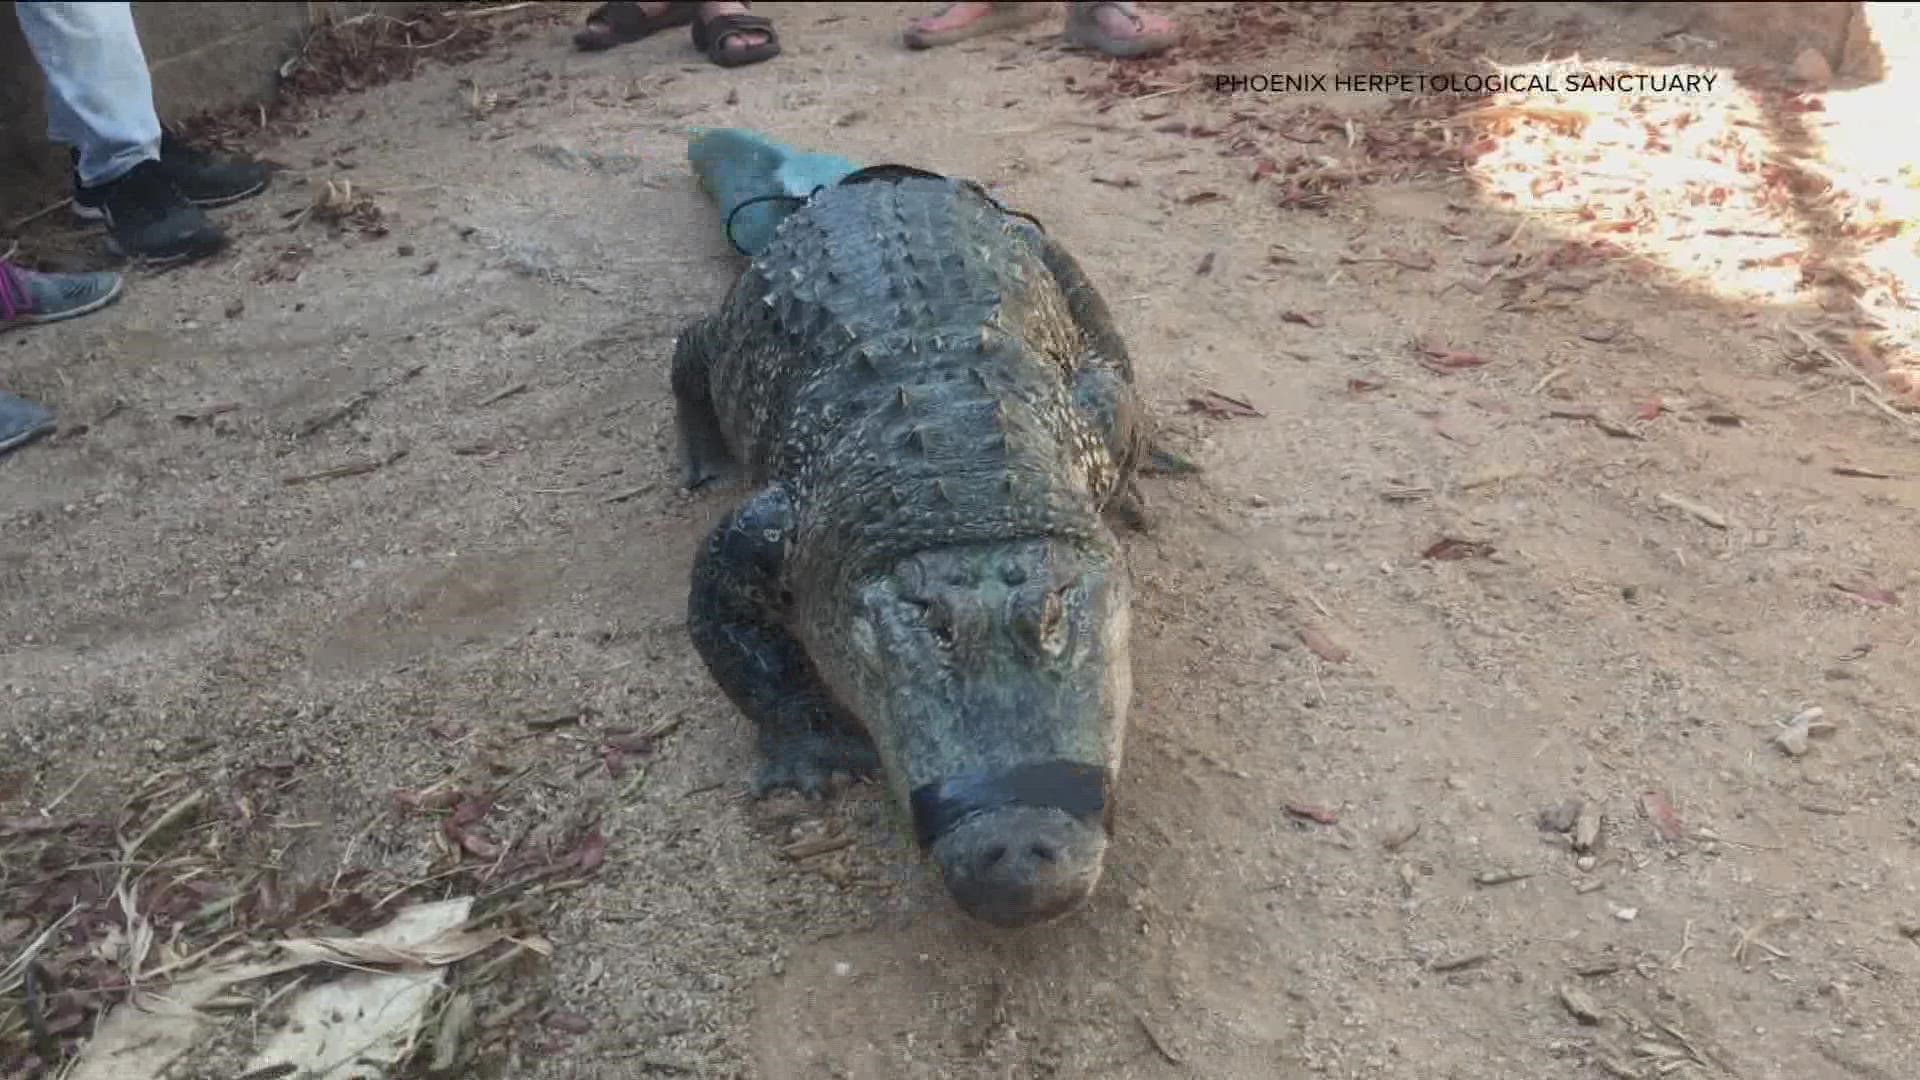 The Phoenix Herpetological Society announced the alligator's death this week. Mr. Stubbs got a second chance at life by receiving a 3D-printed prosthetic tail.